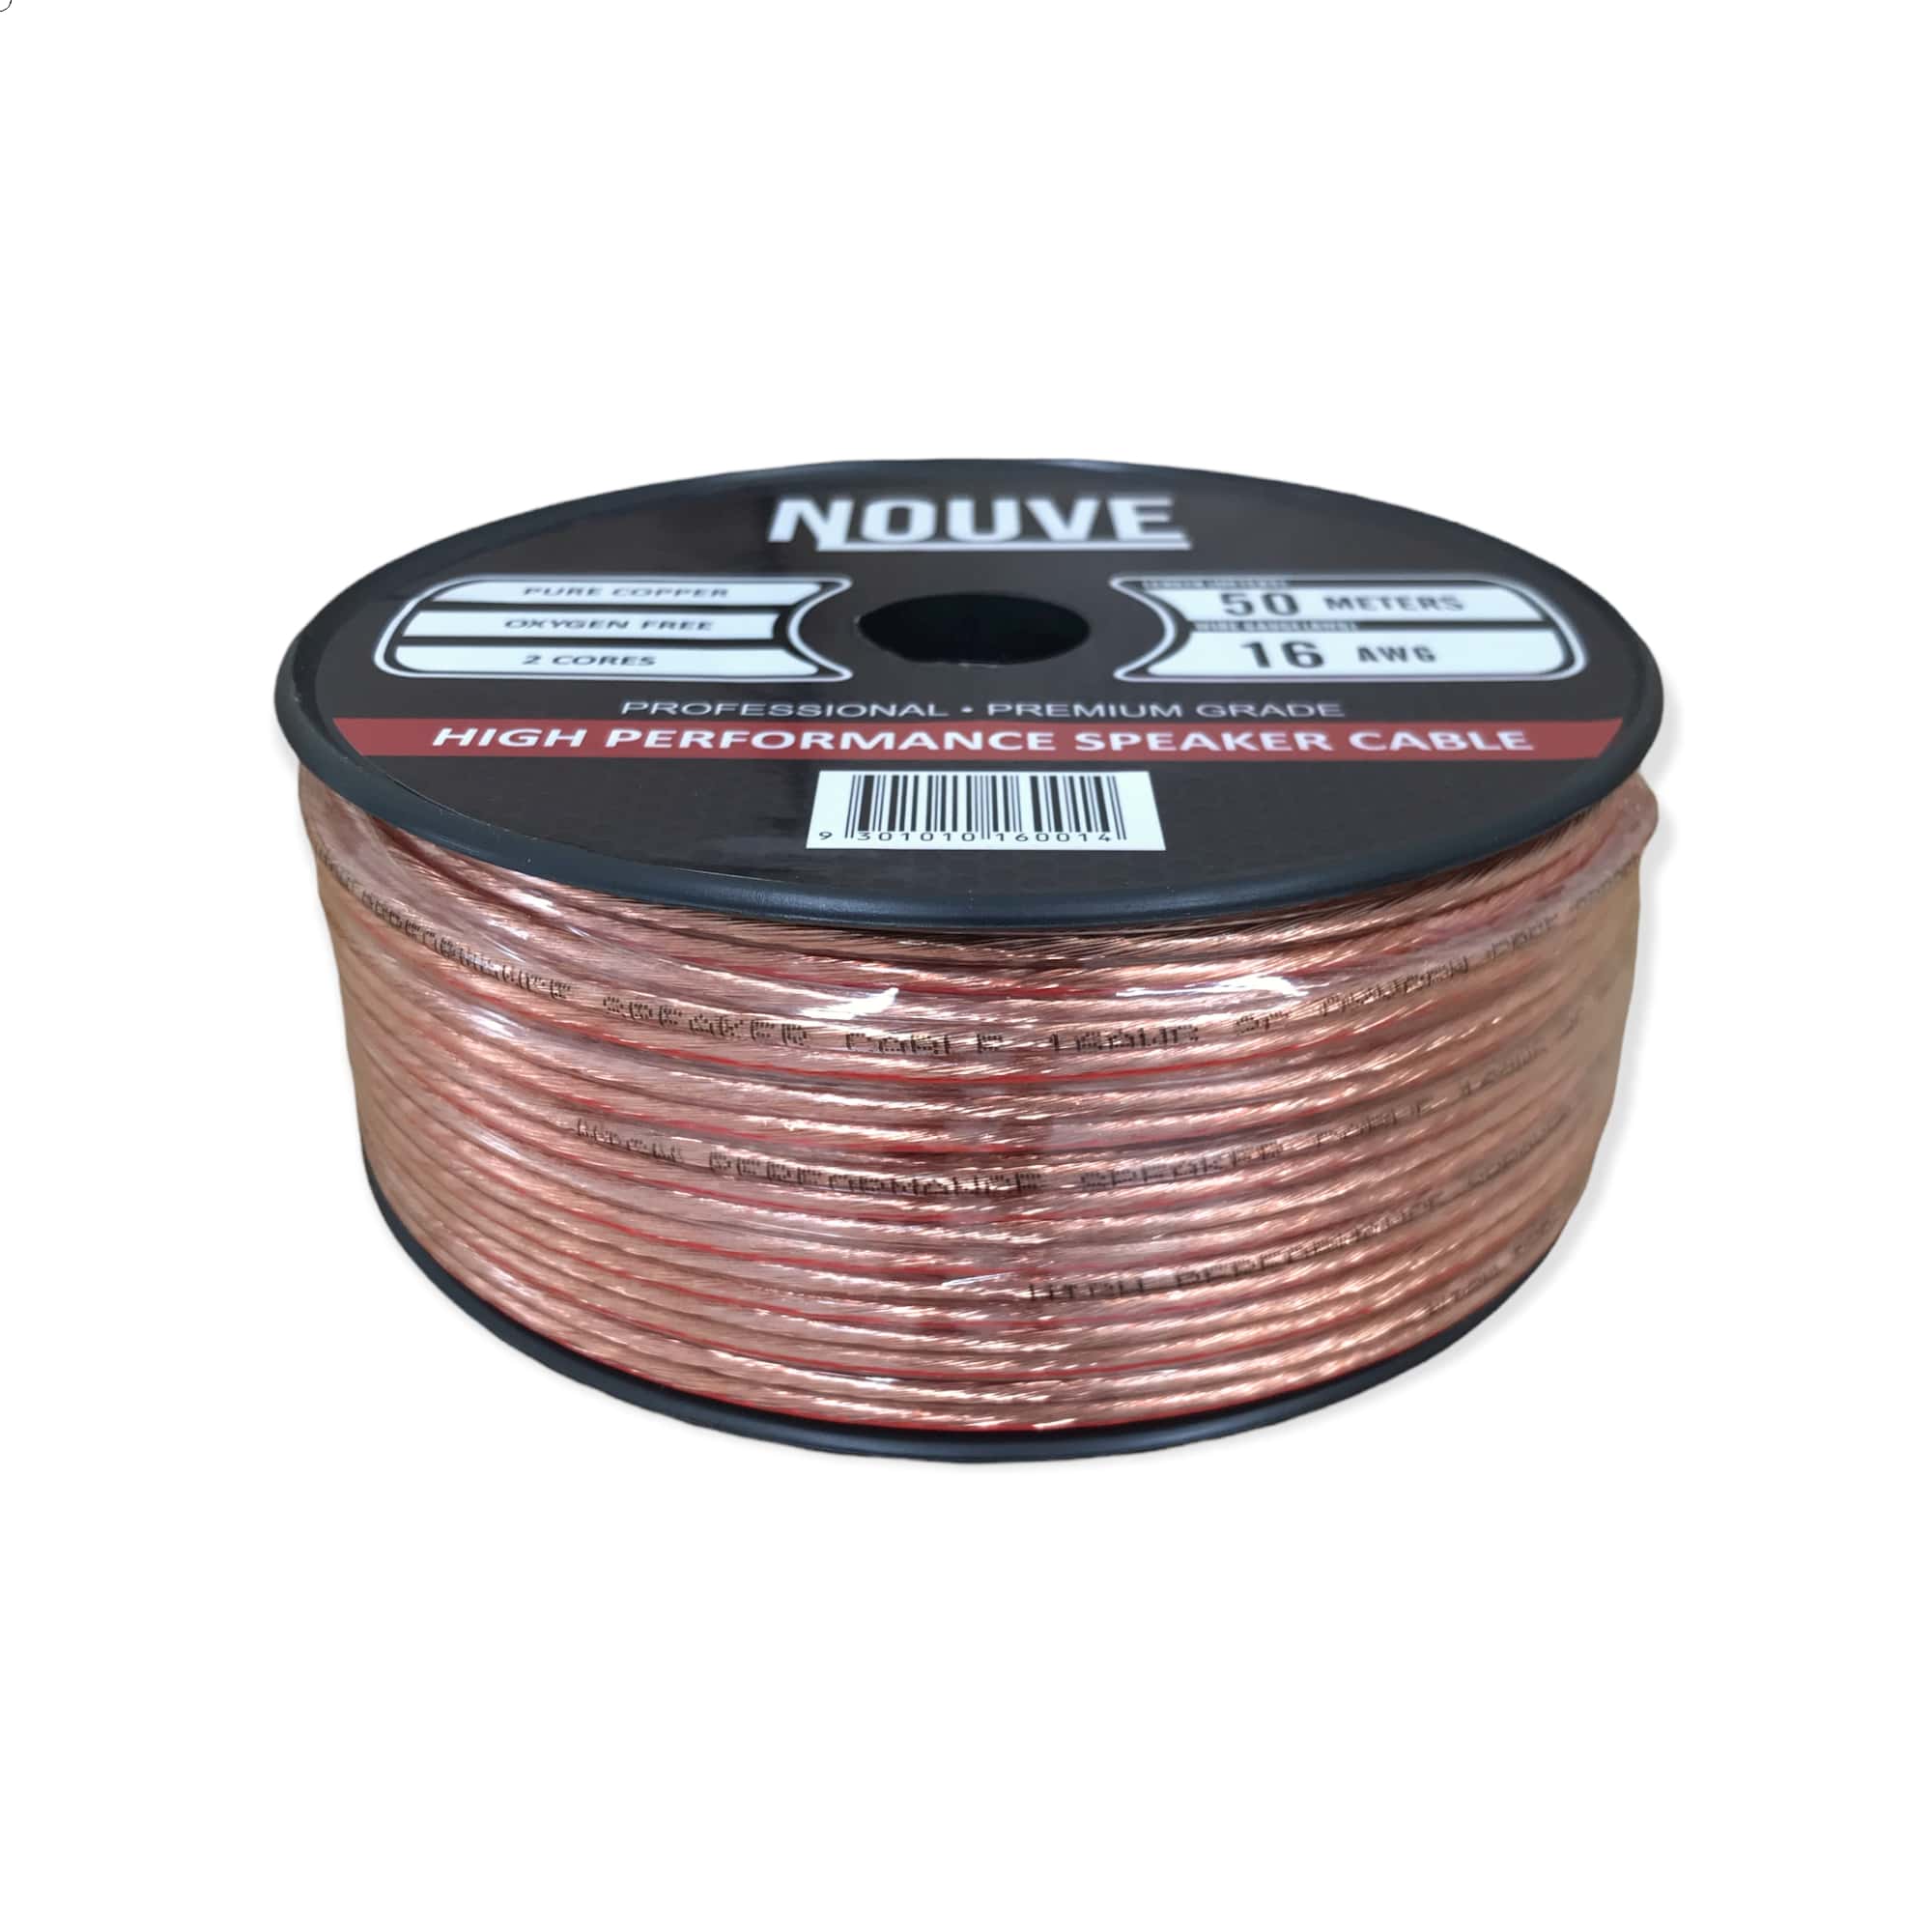 16 awg speaker cable